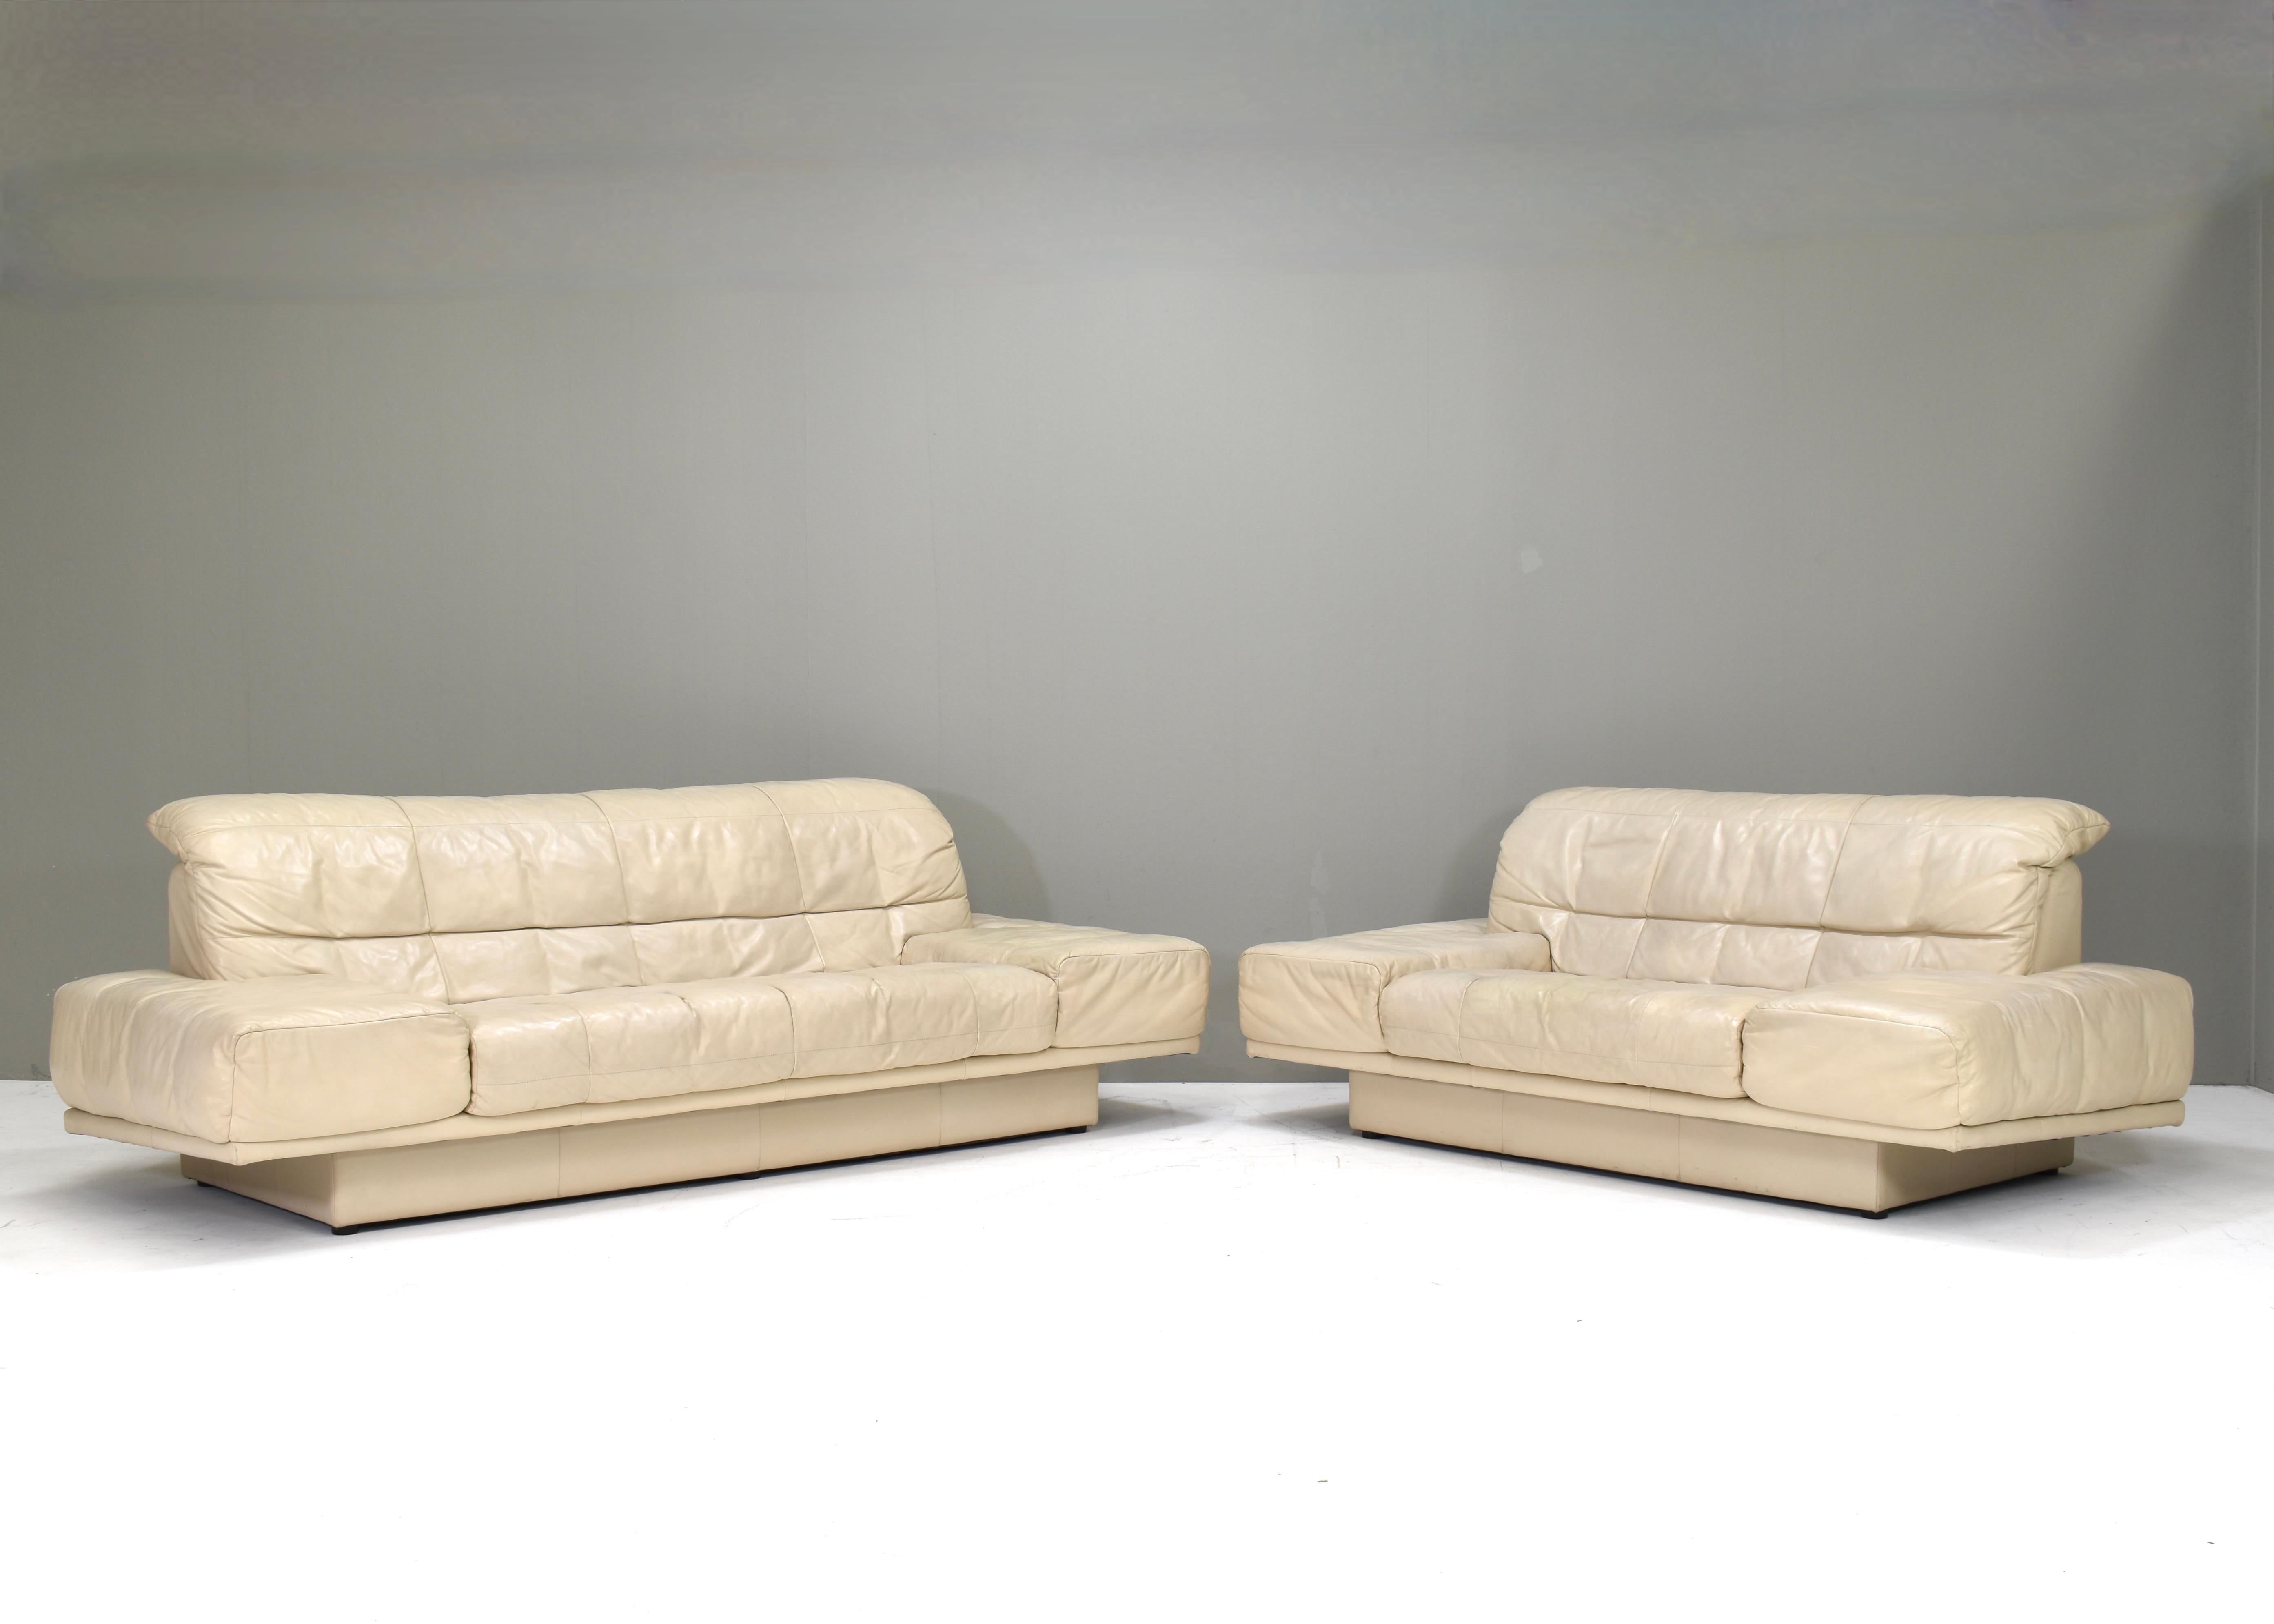 Rolf Benz 2-seat sofa in Ivory Cream White Leather – Germany, circa 1980-1990 For Sale 1